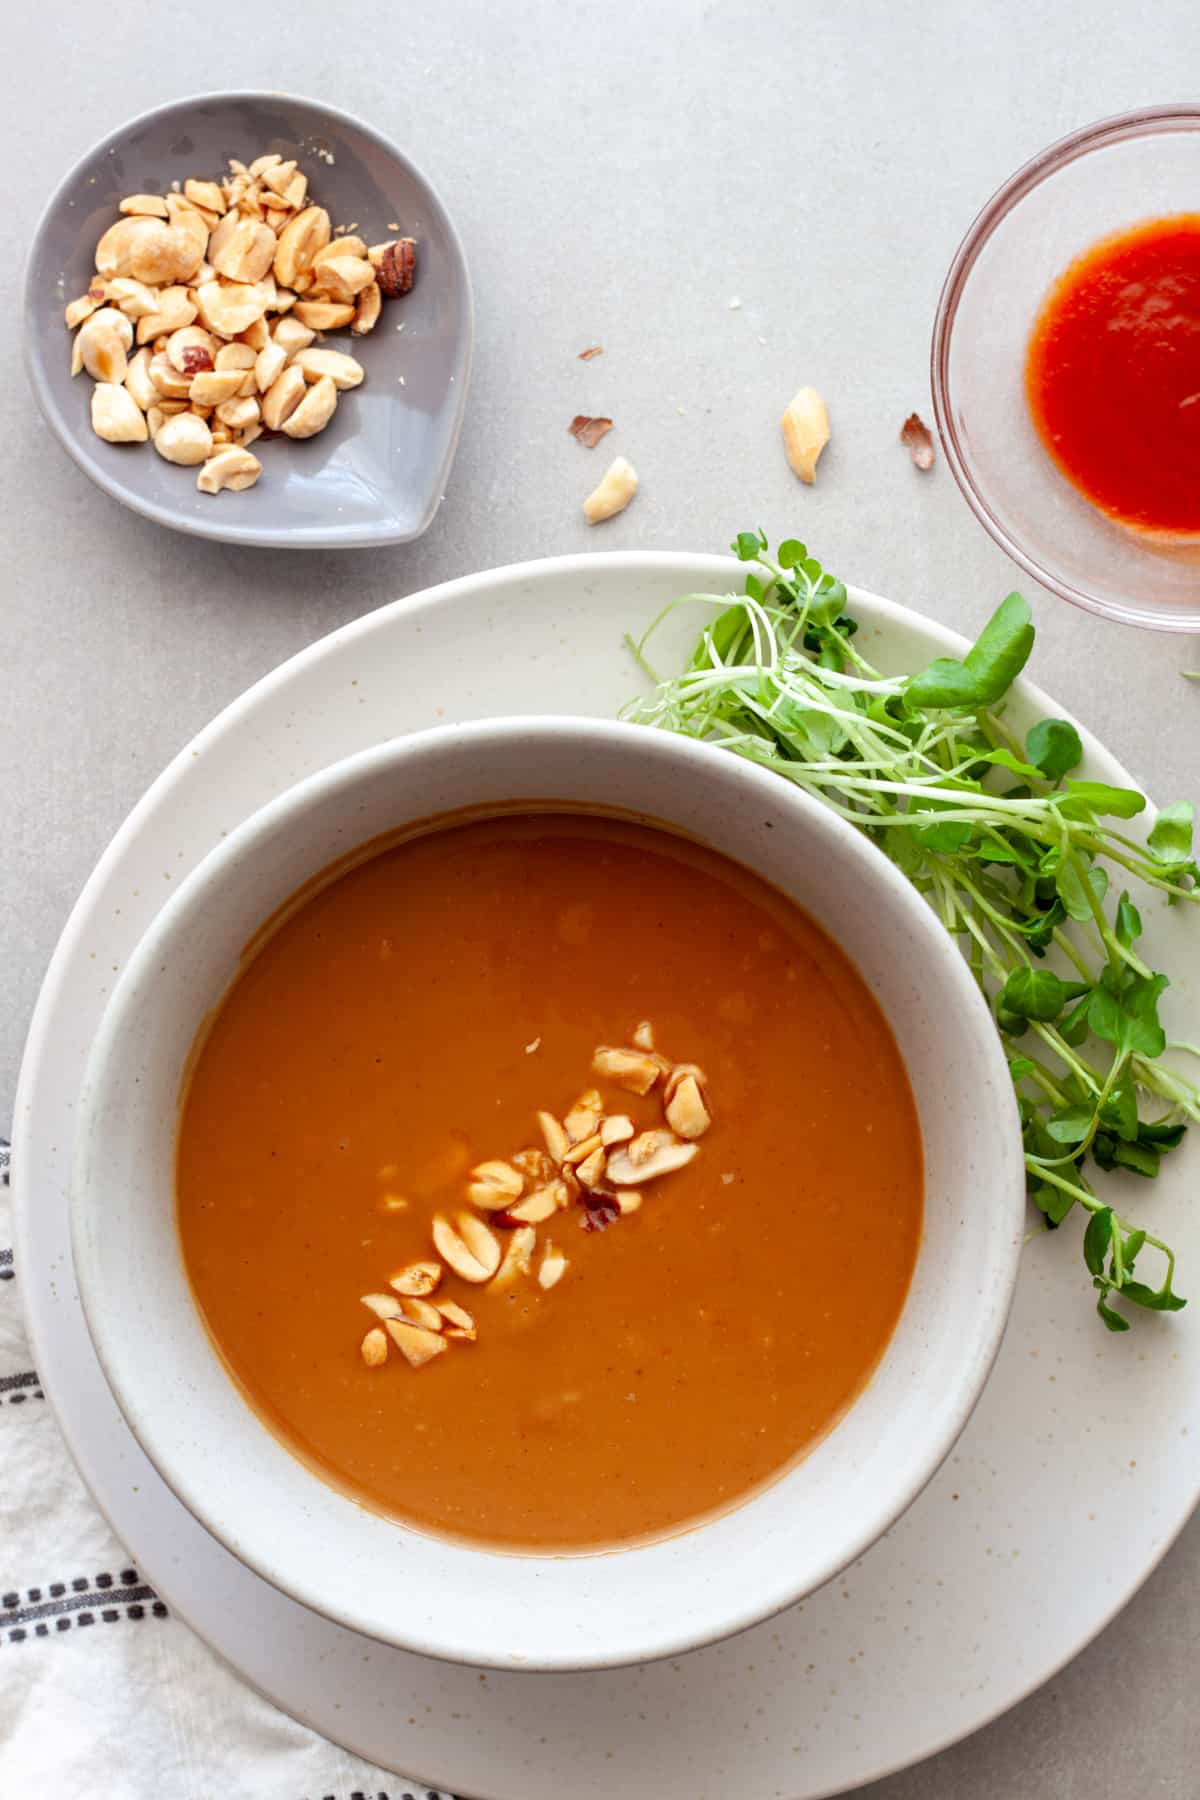 A bowl of Vietnamese peanut sauce in a bowl with greens, peanuts and sriracha to the side.